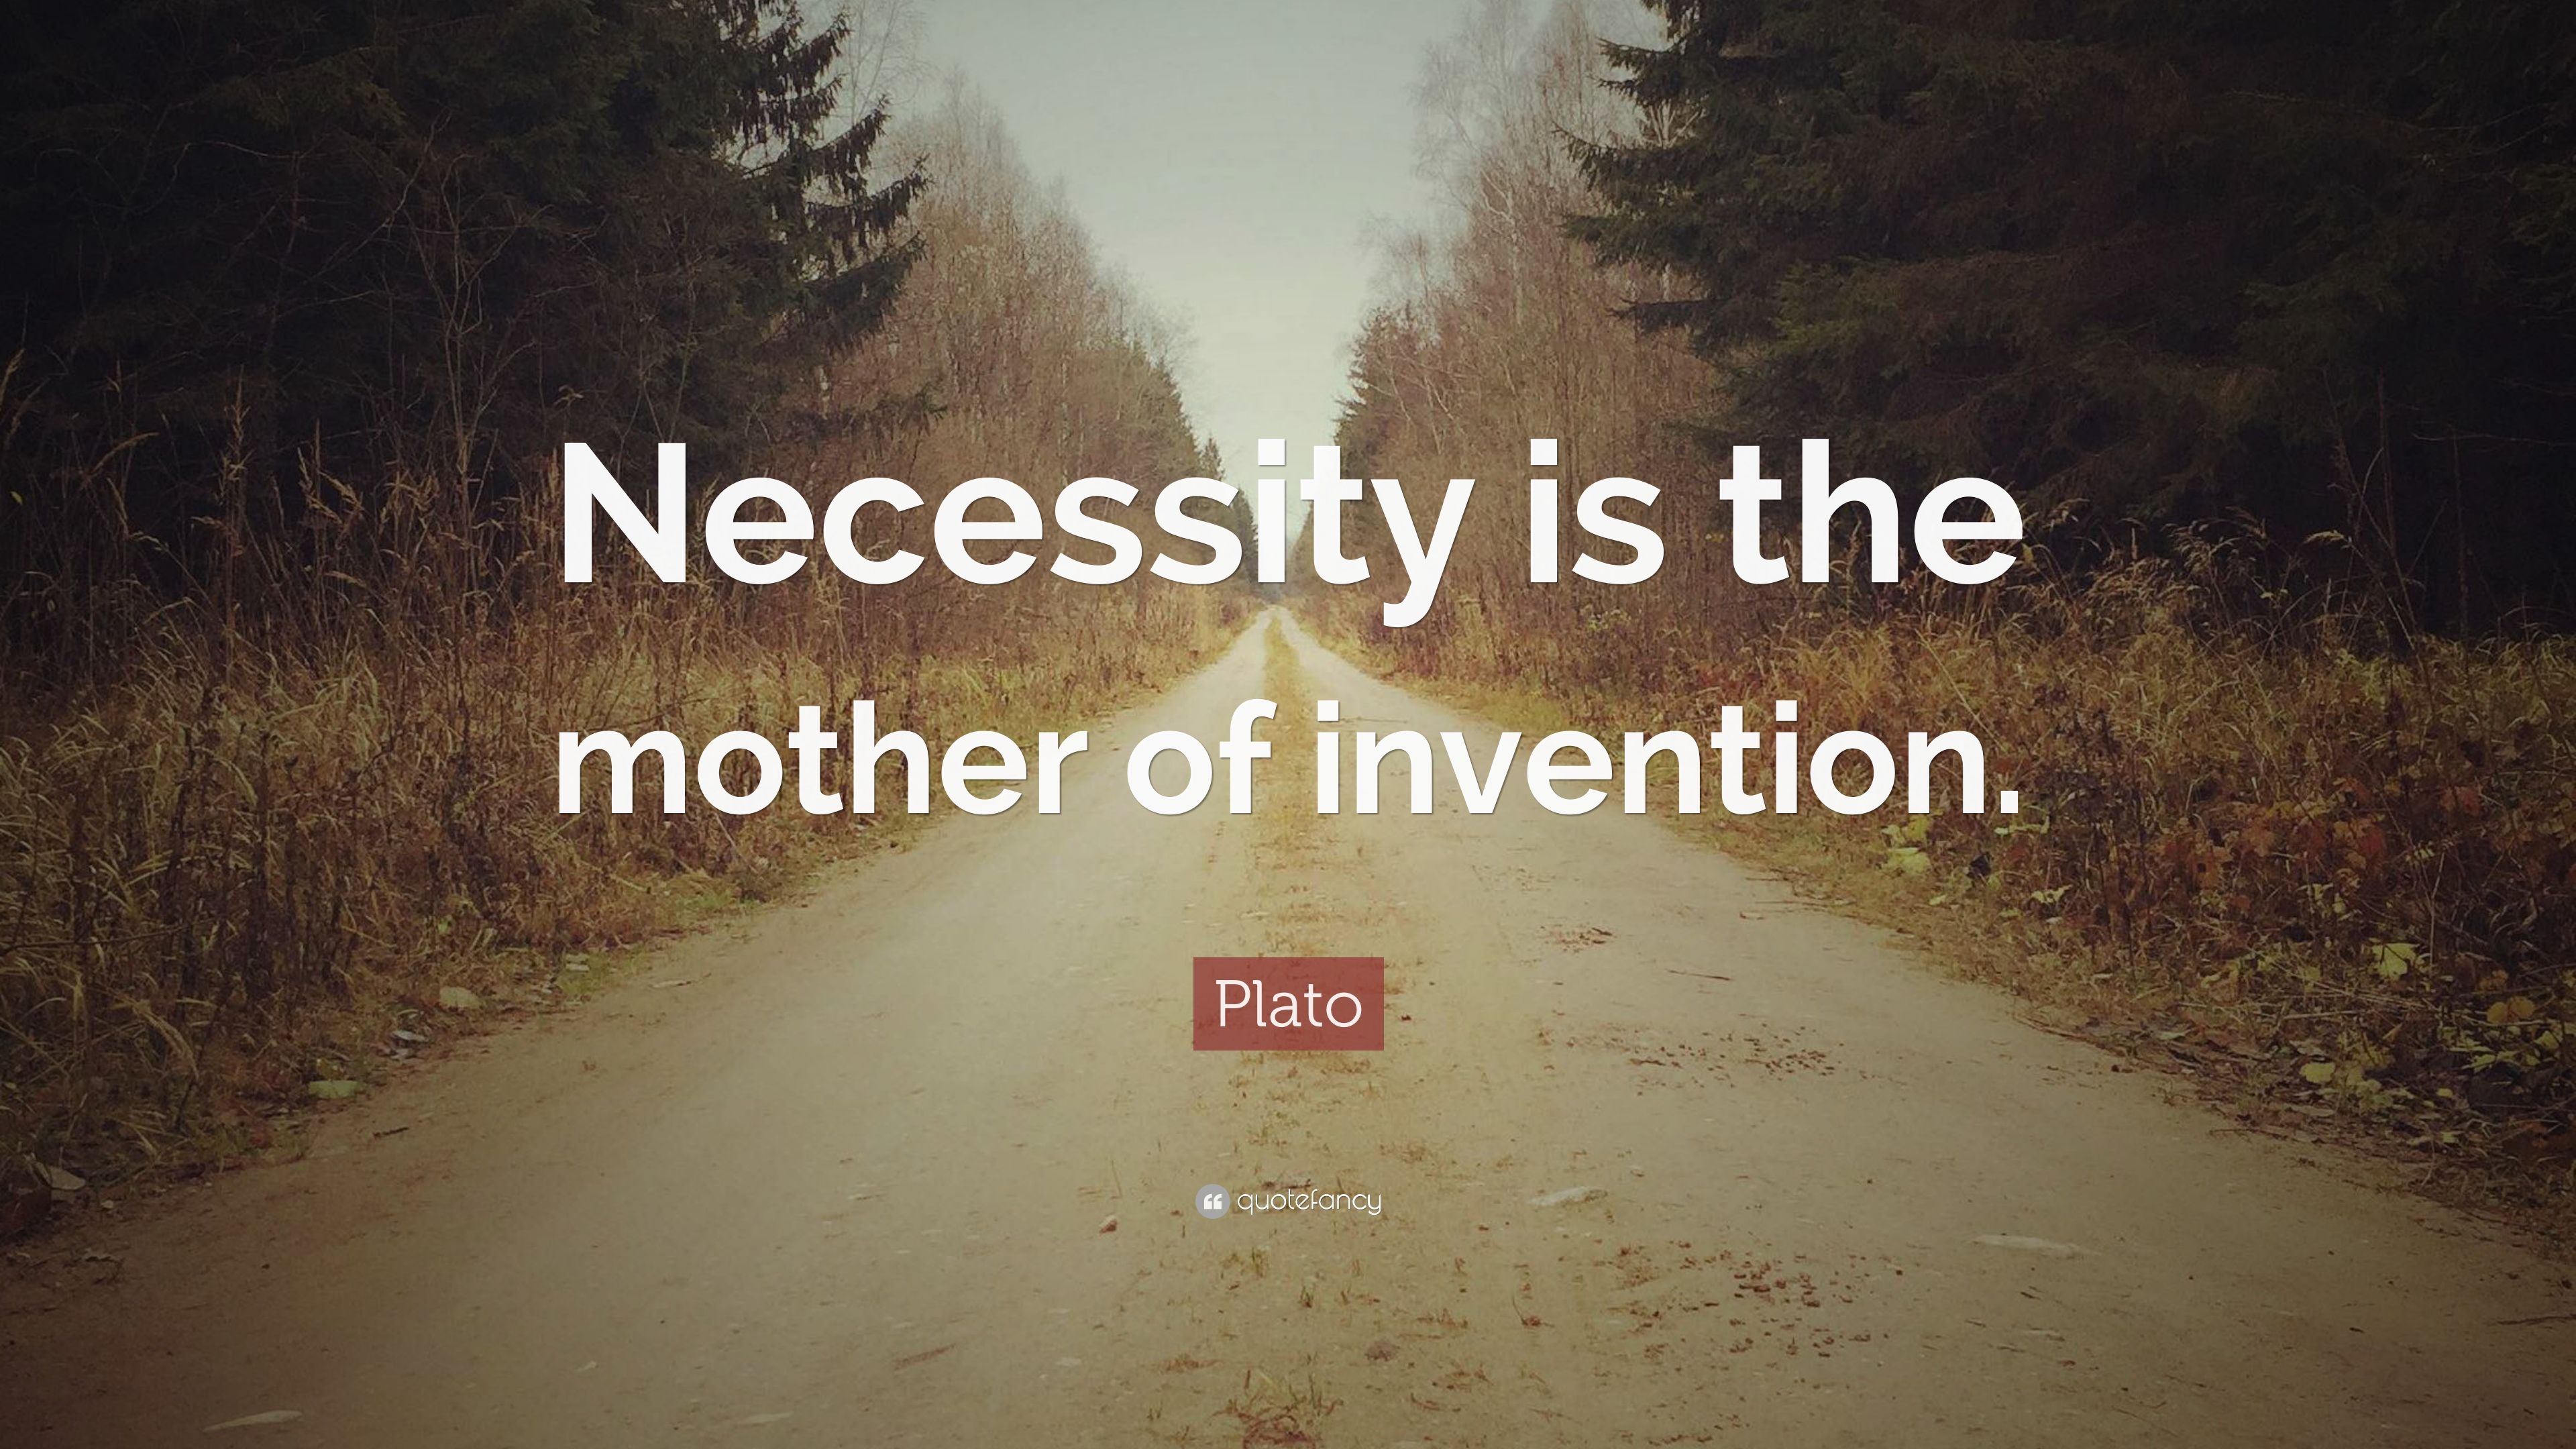 Plato Quote: “Necessity is the mother of invention.” (12 wallpaper)